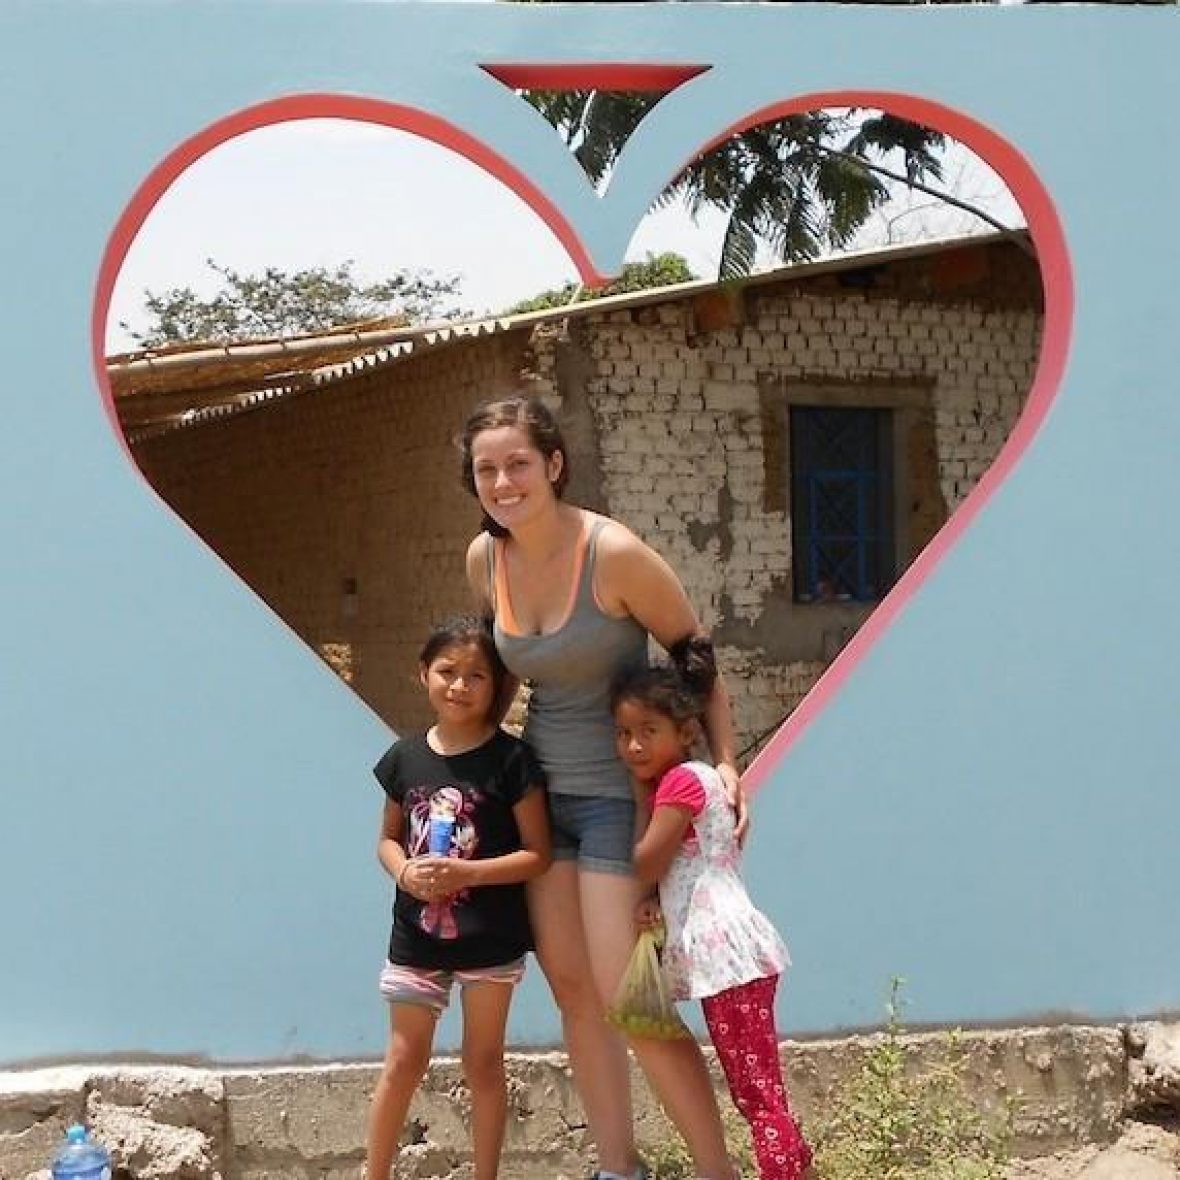 MaryBeth Apriceno wearing a tank top and denim shorts smiles at the camera, hugging a child with each arm, with graffiti in the shape of a heart on the wall behind her